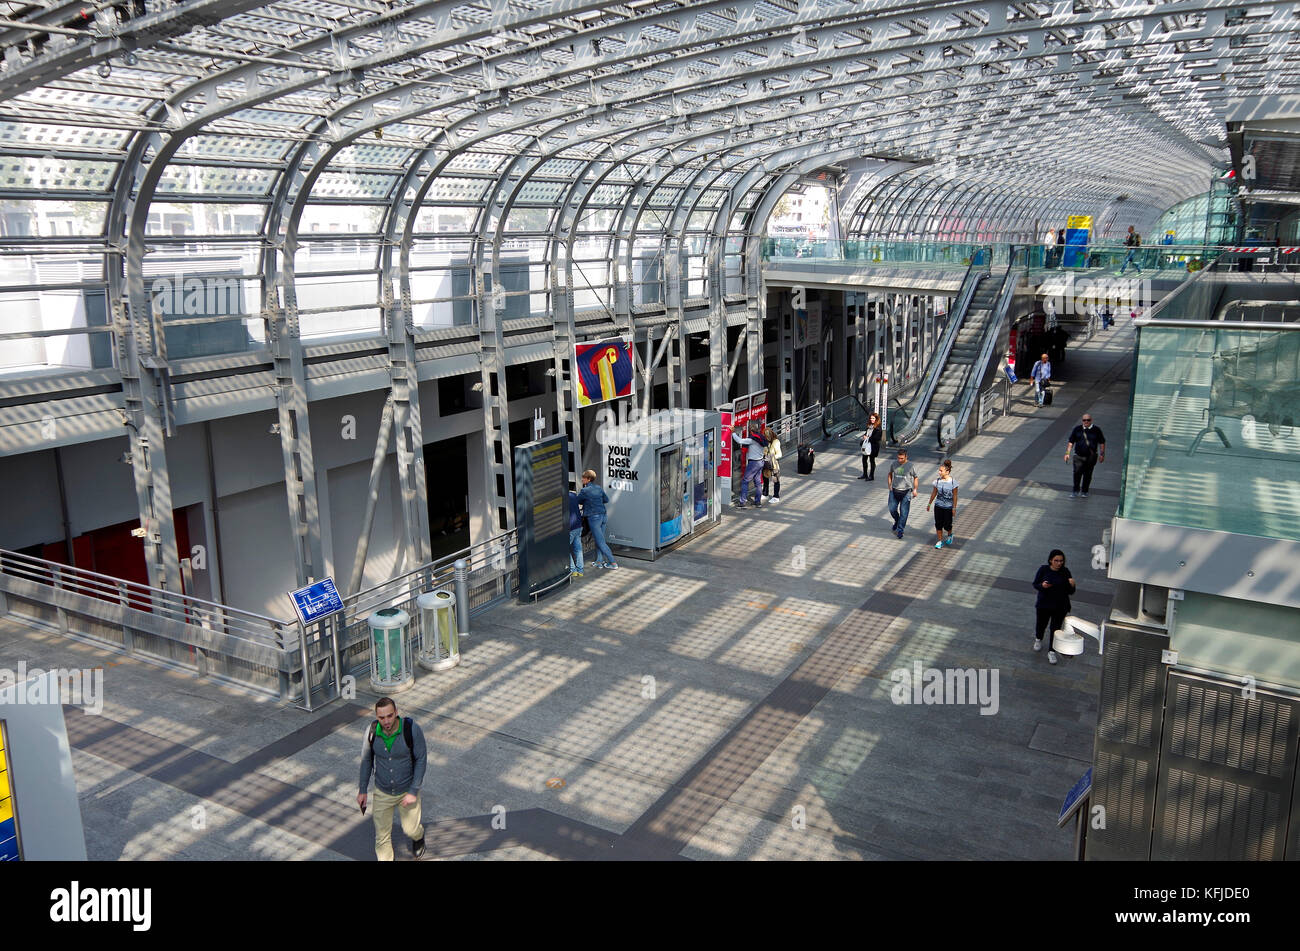 Porta Susa railway station, Turin, Torino, Italy, high-tech arched structure368 m long, 30 m span. Stock Photo